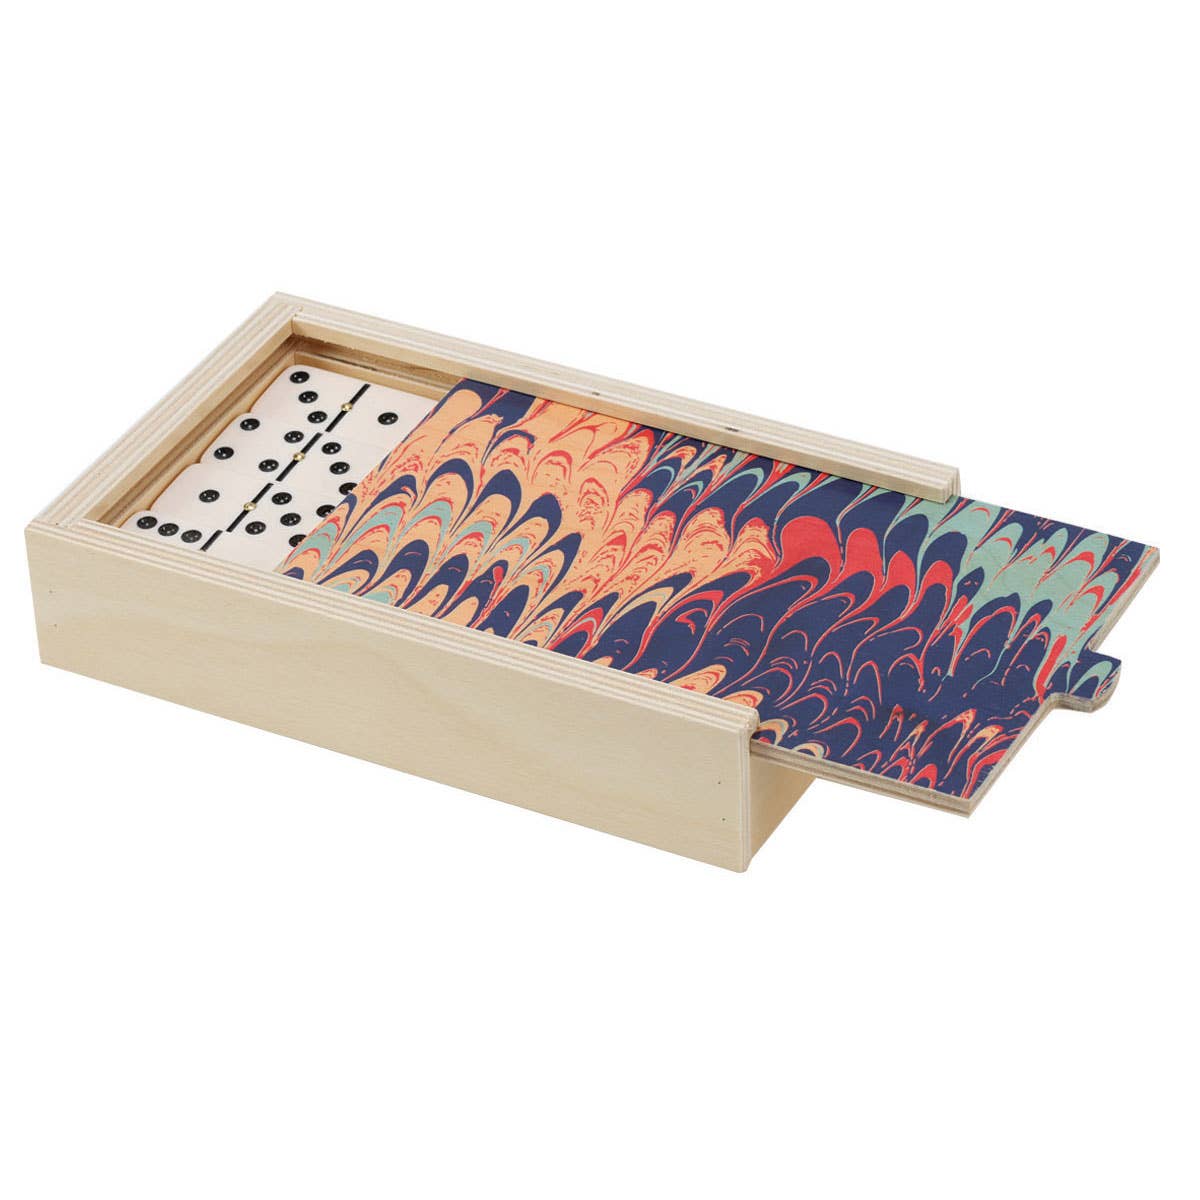 dominoes in a hand painted wood box